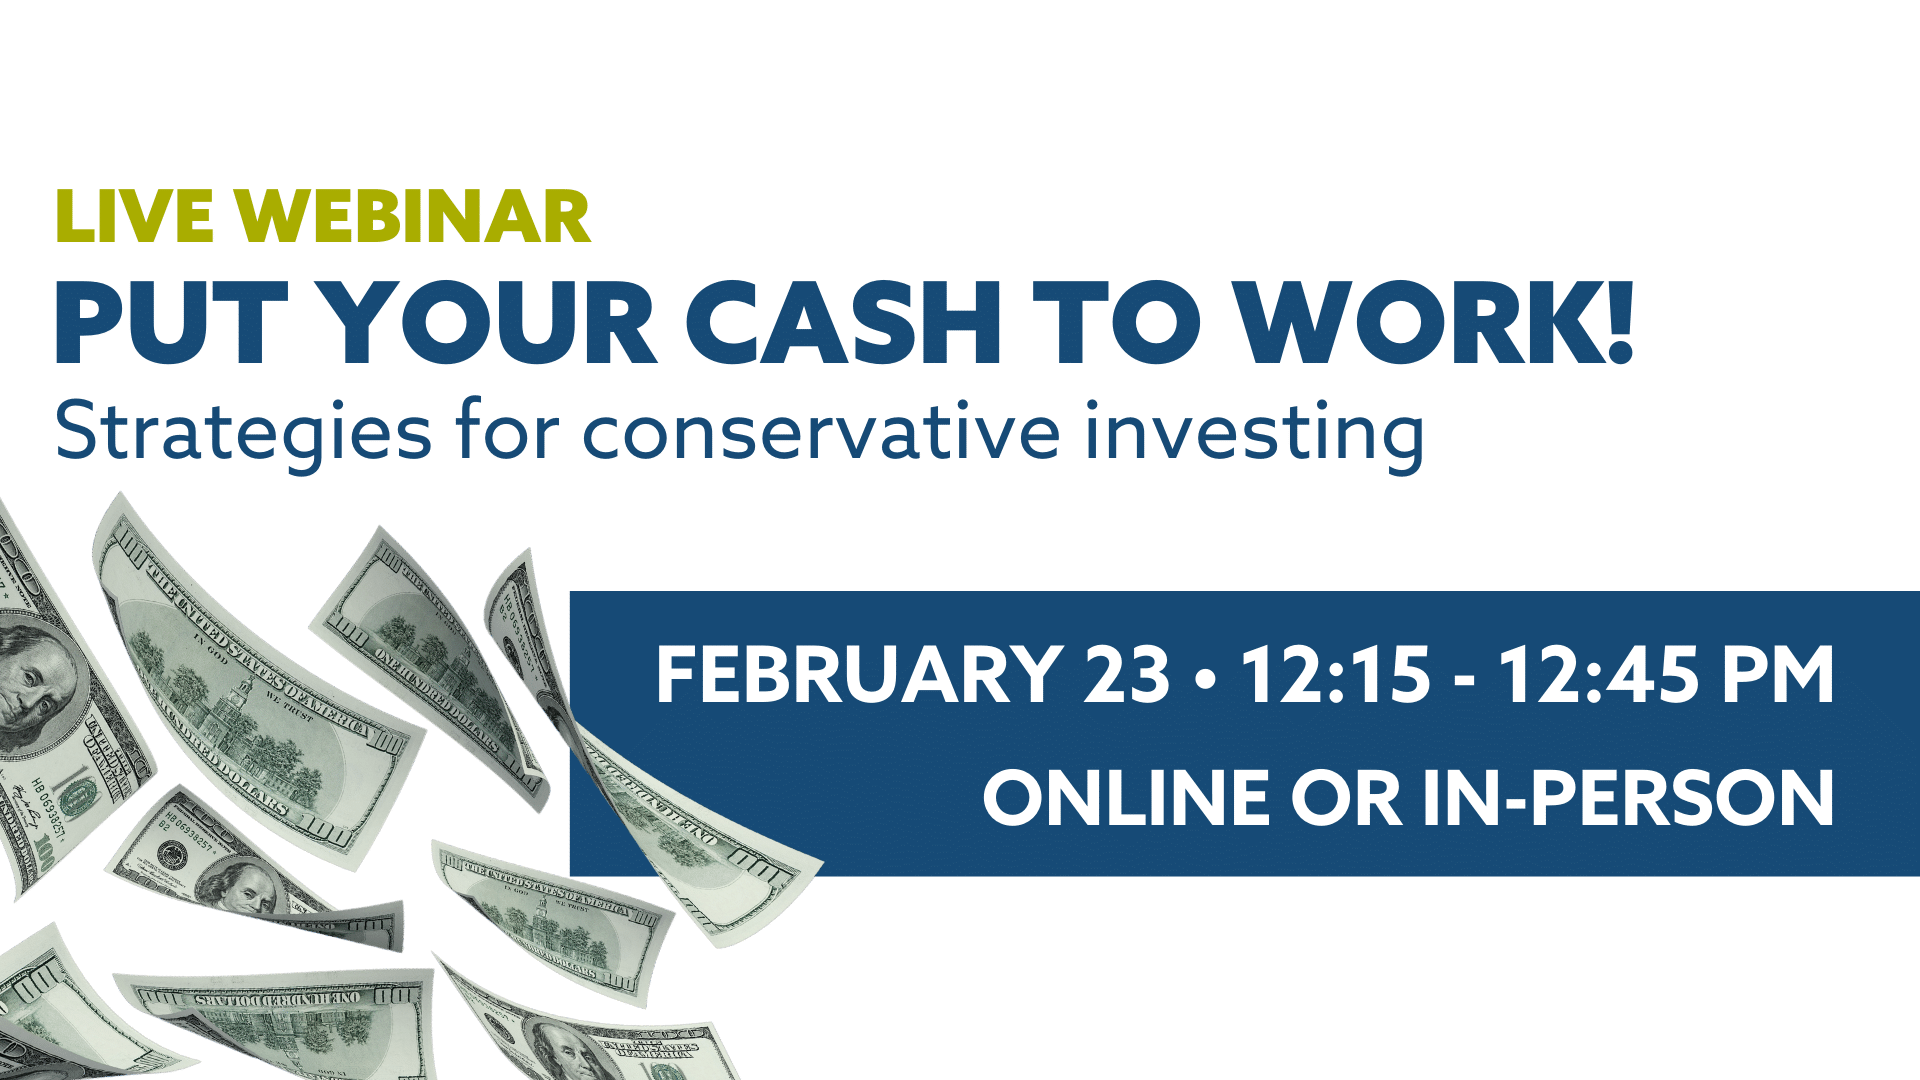 Live webinar. Put your cash to work: strategies for conservative investing. February 23 from 12:15 to 12:45 pm. Online or in-person.